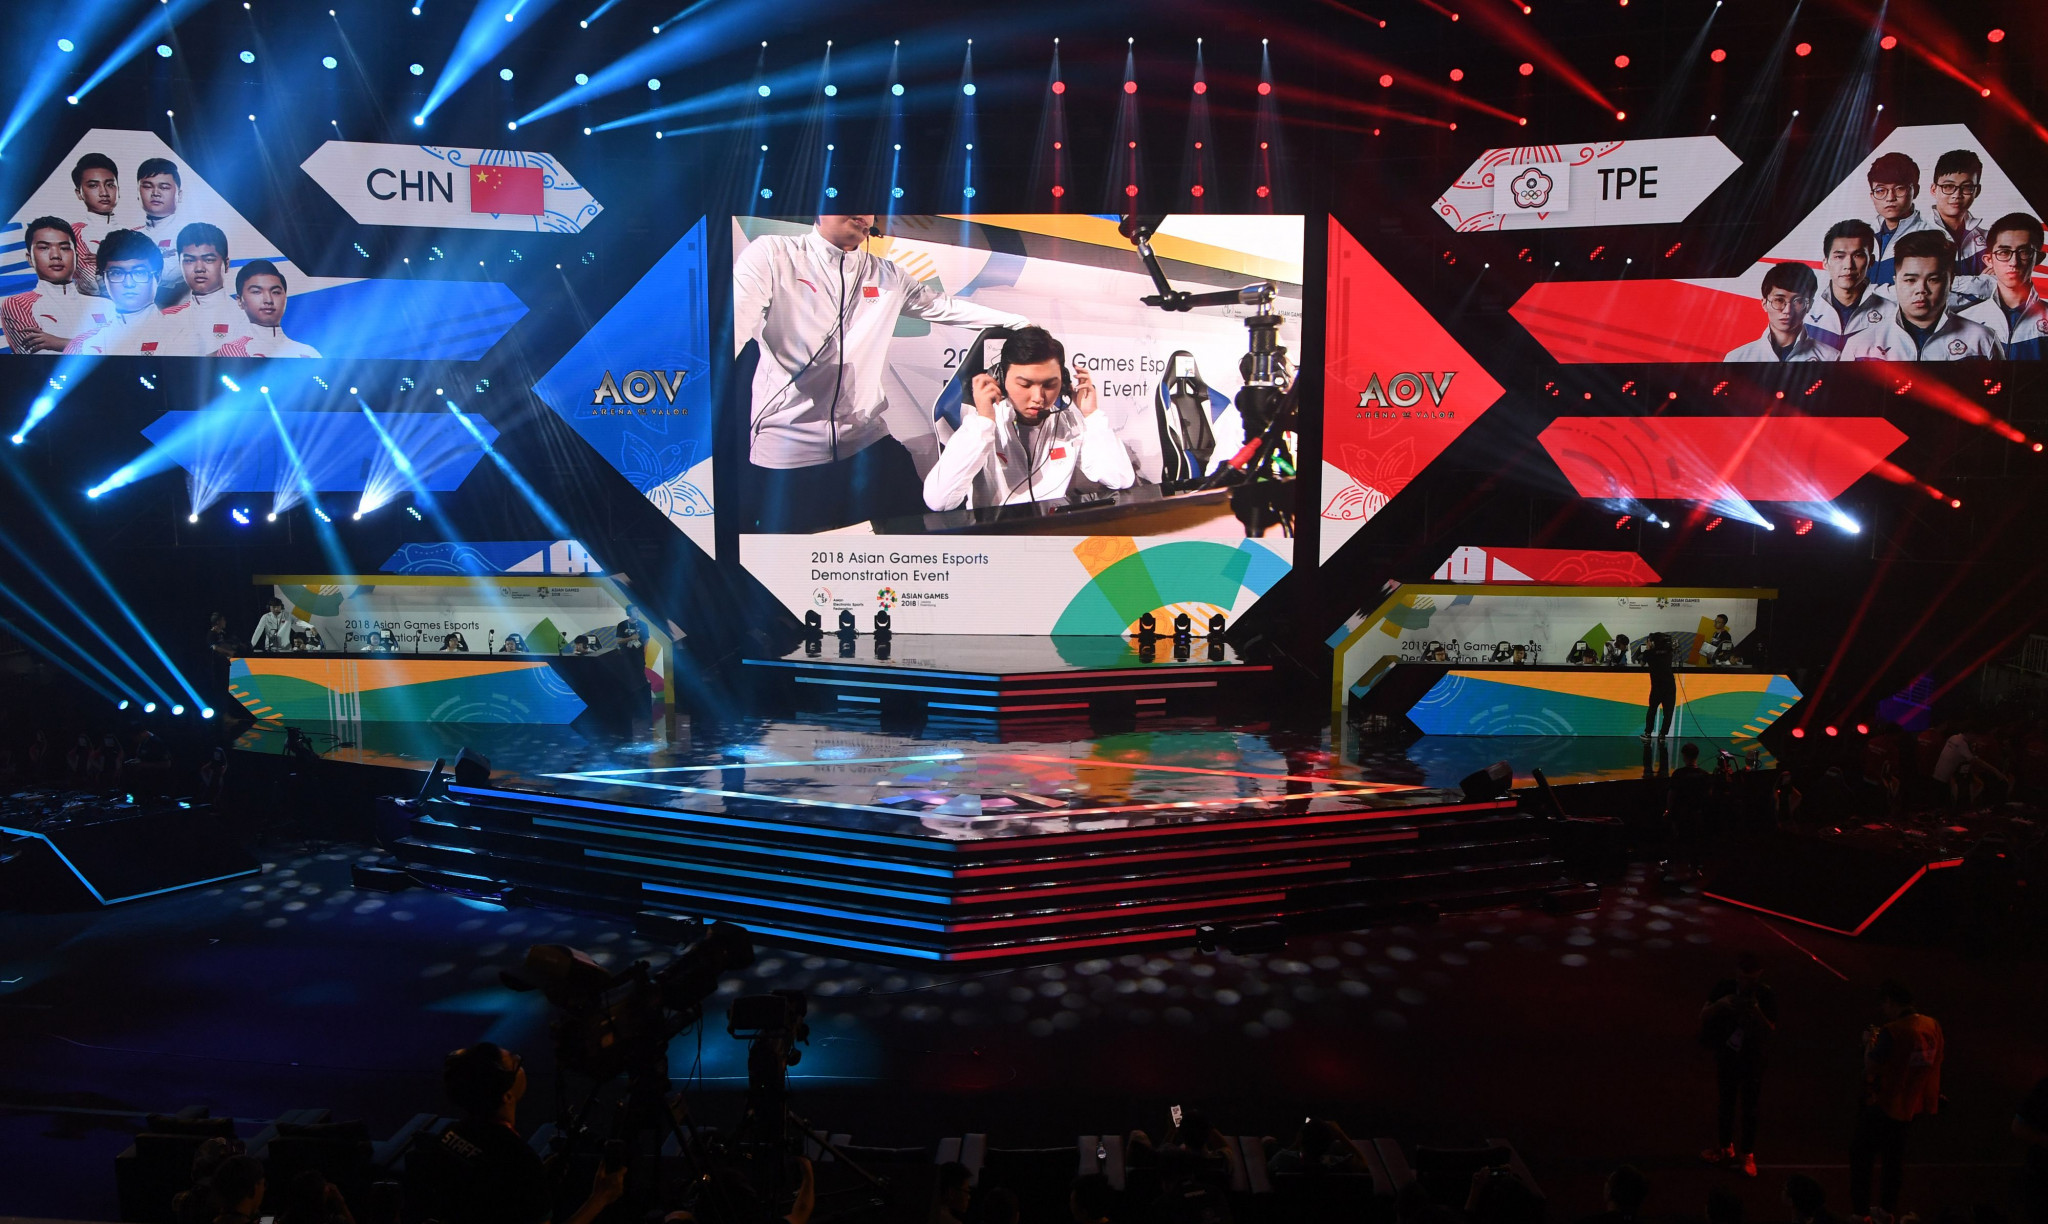 Esports took place as a demonstration sport at the 2018 Asian Games in Jakarta ©Getty Images